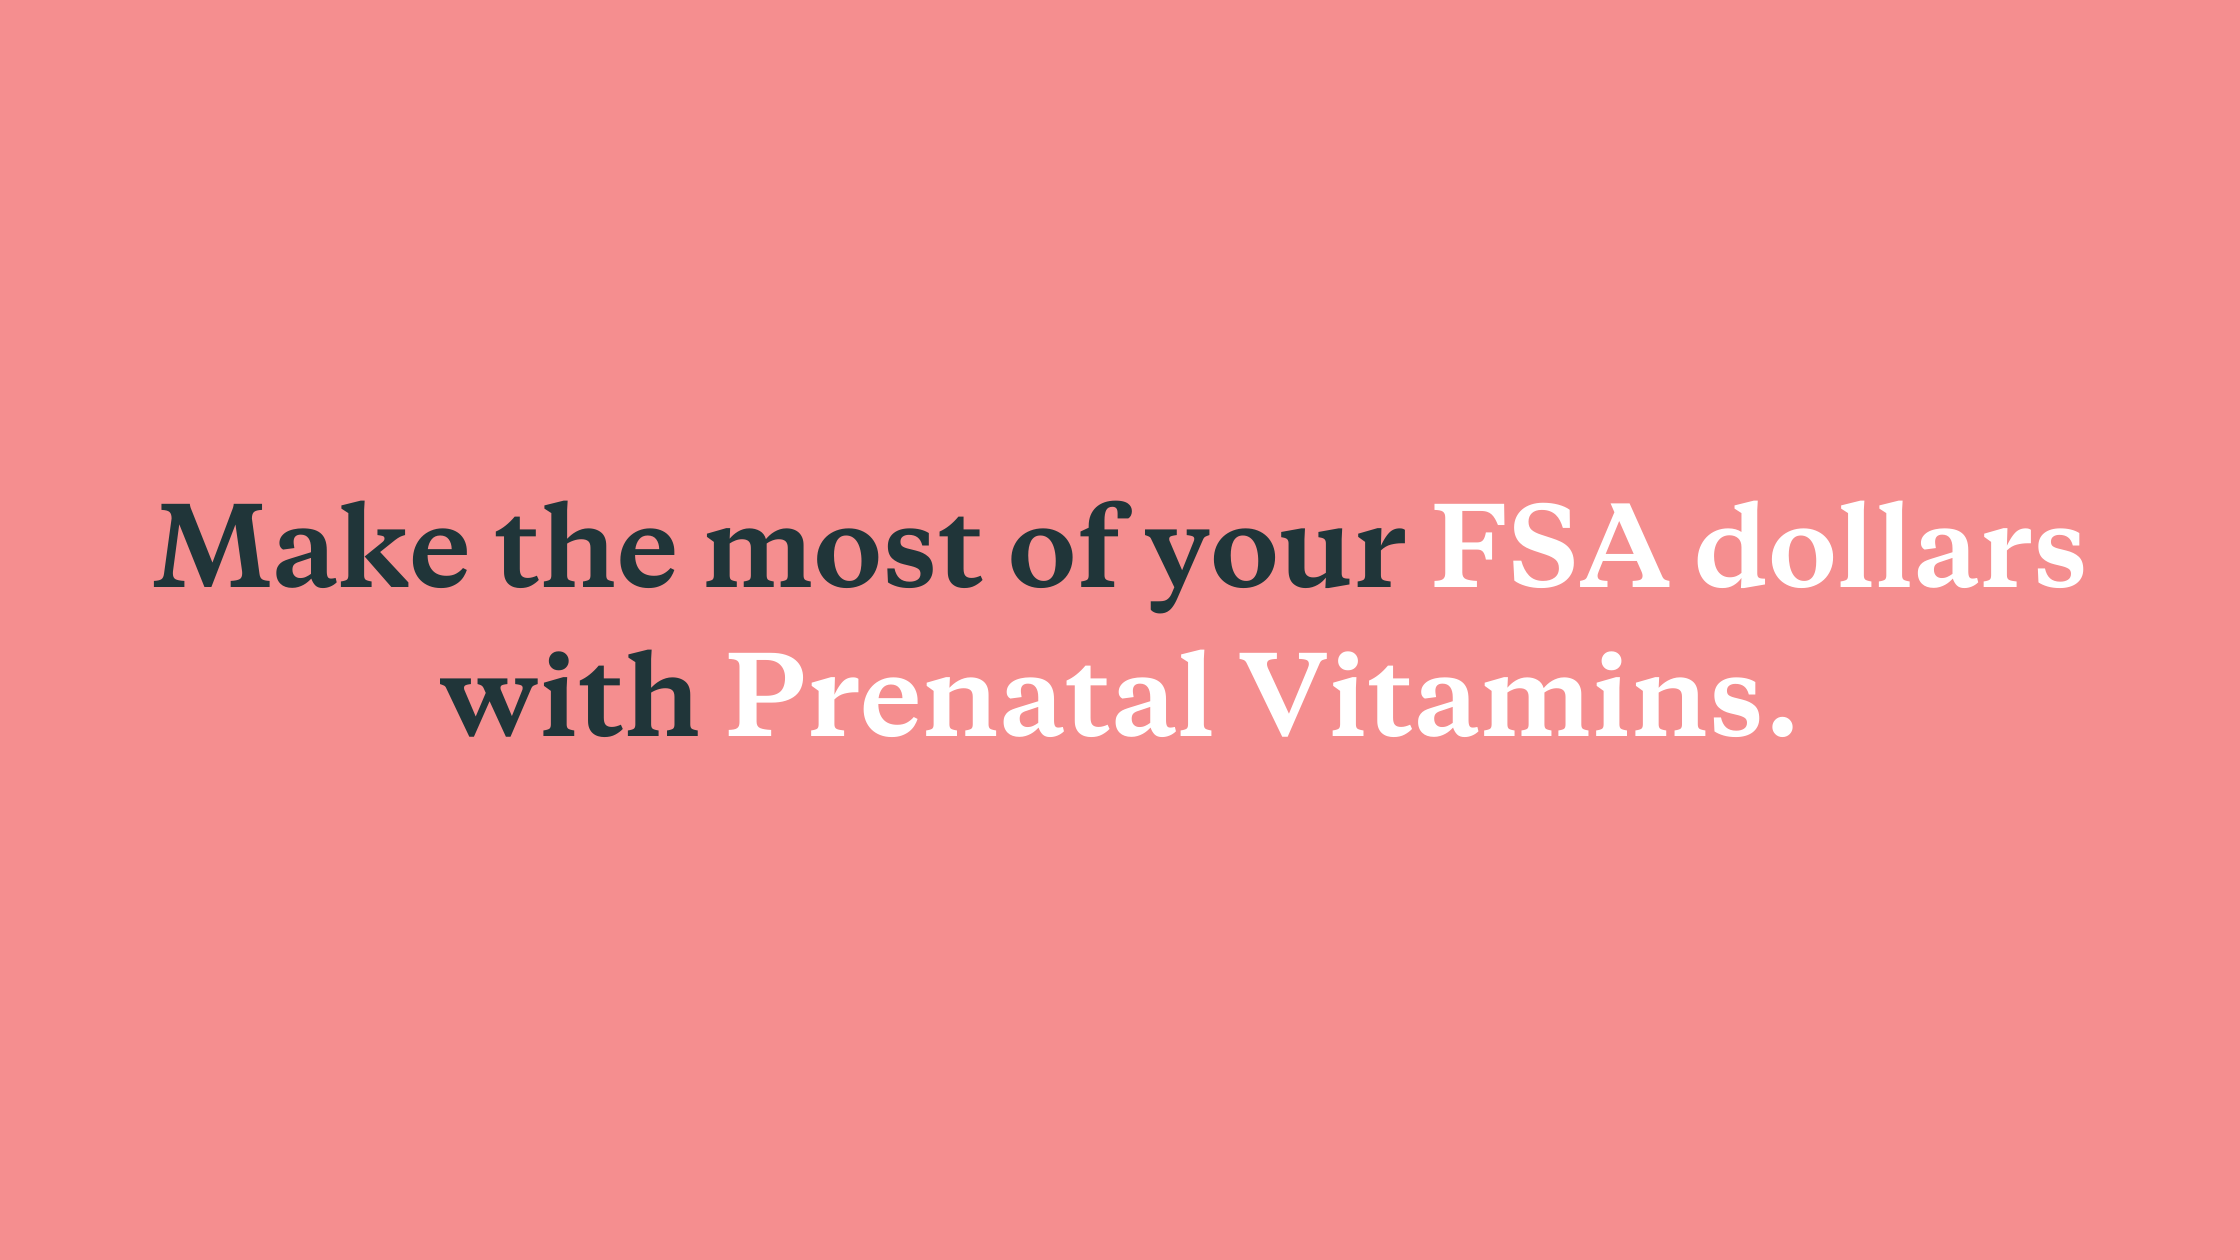 Vitamins & Supplements That Are Not HSA Qualified - HSA for America